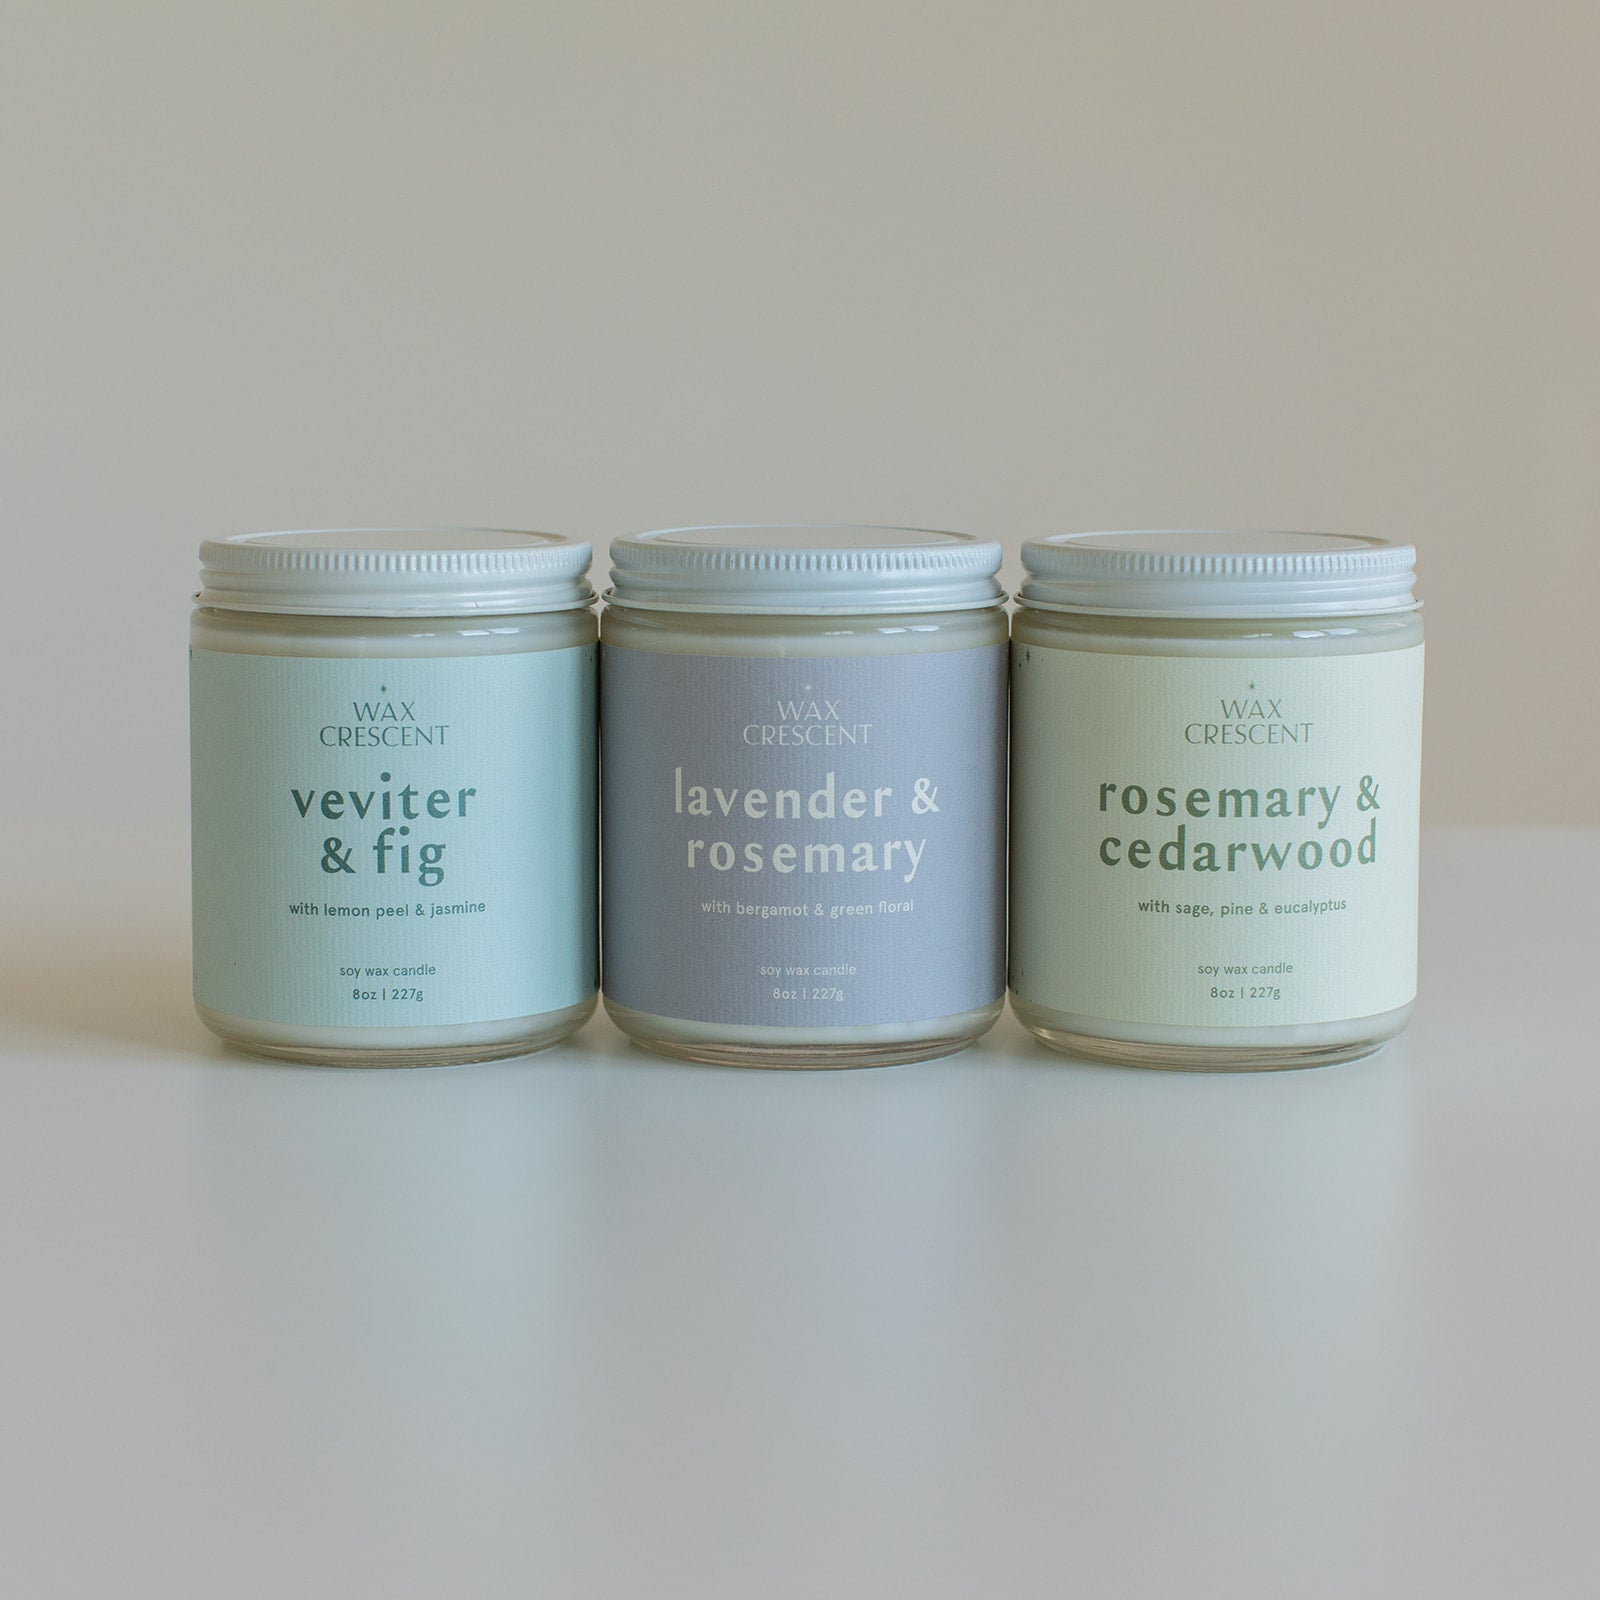 luxury and affordable soy wax candles made with nontoxic ingredients, fragrance  and natural essential oils